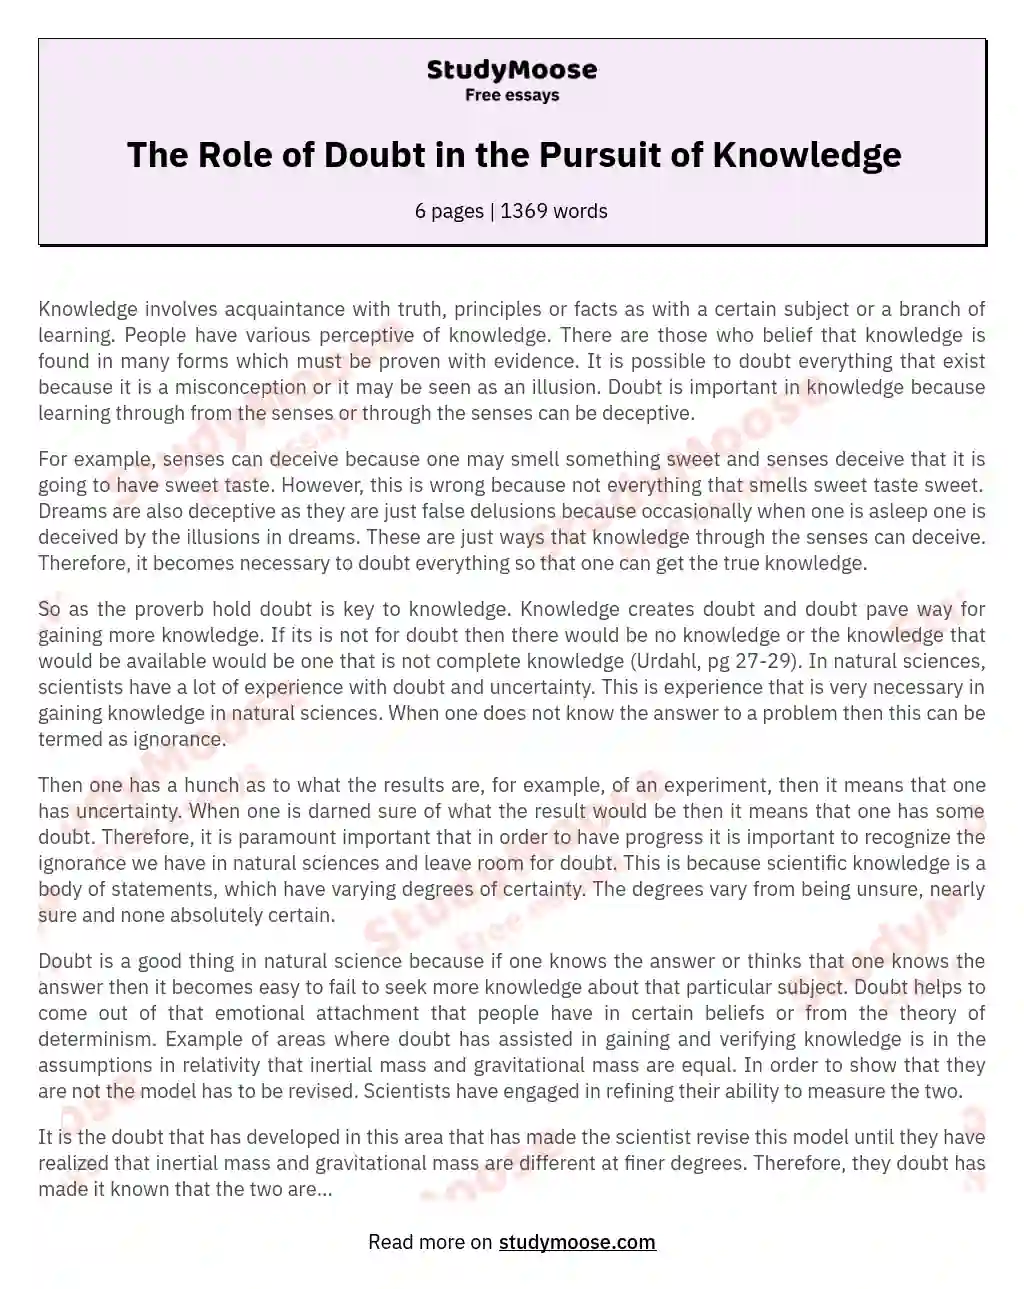 The Role of Doubt in the Pursuit of Knowledge essay